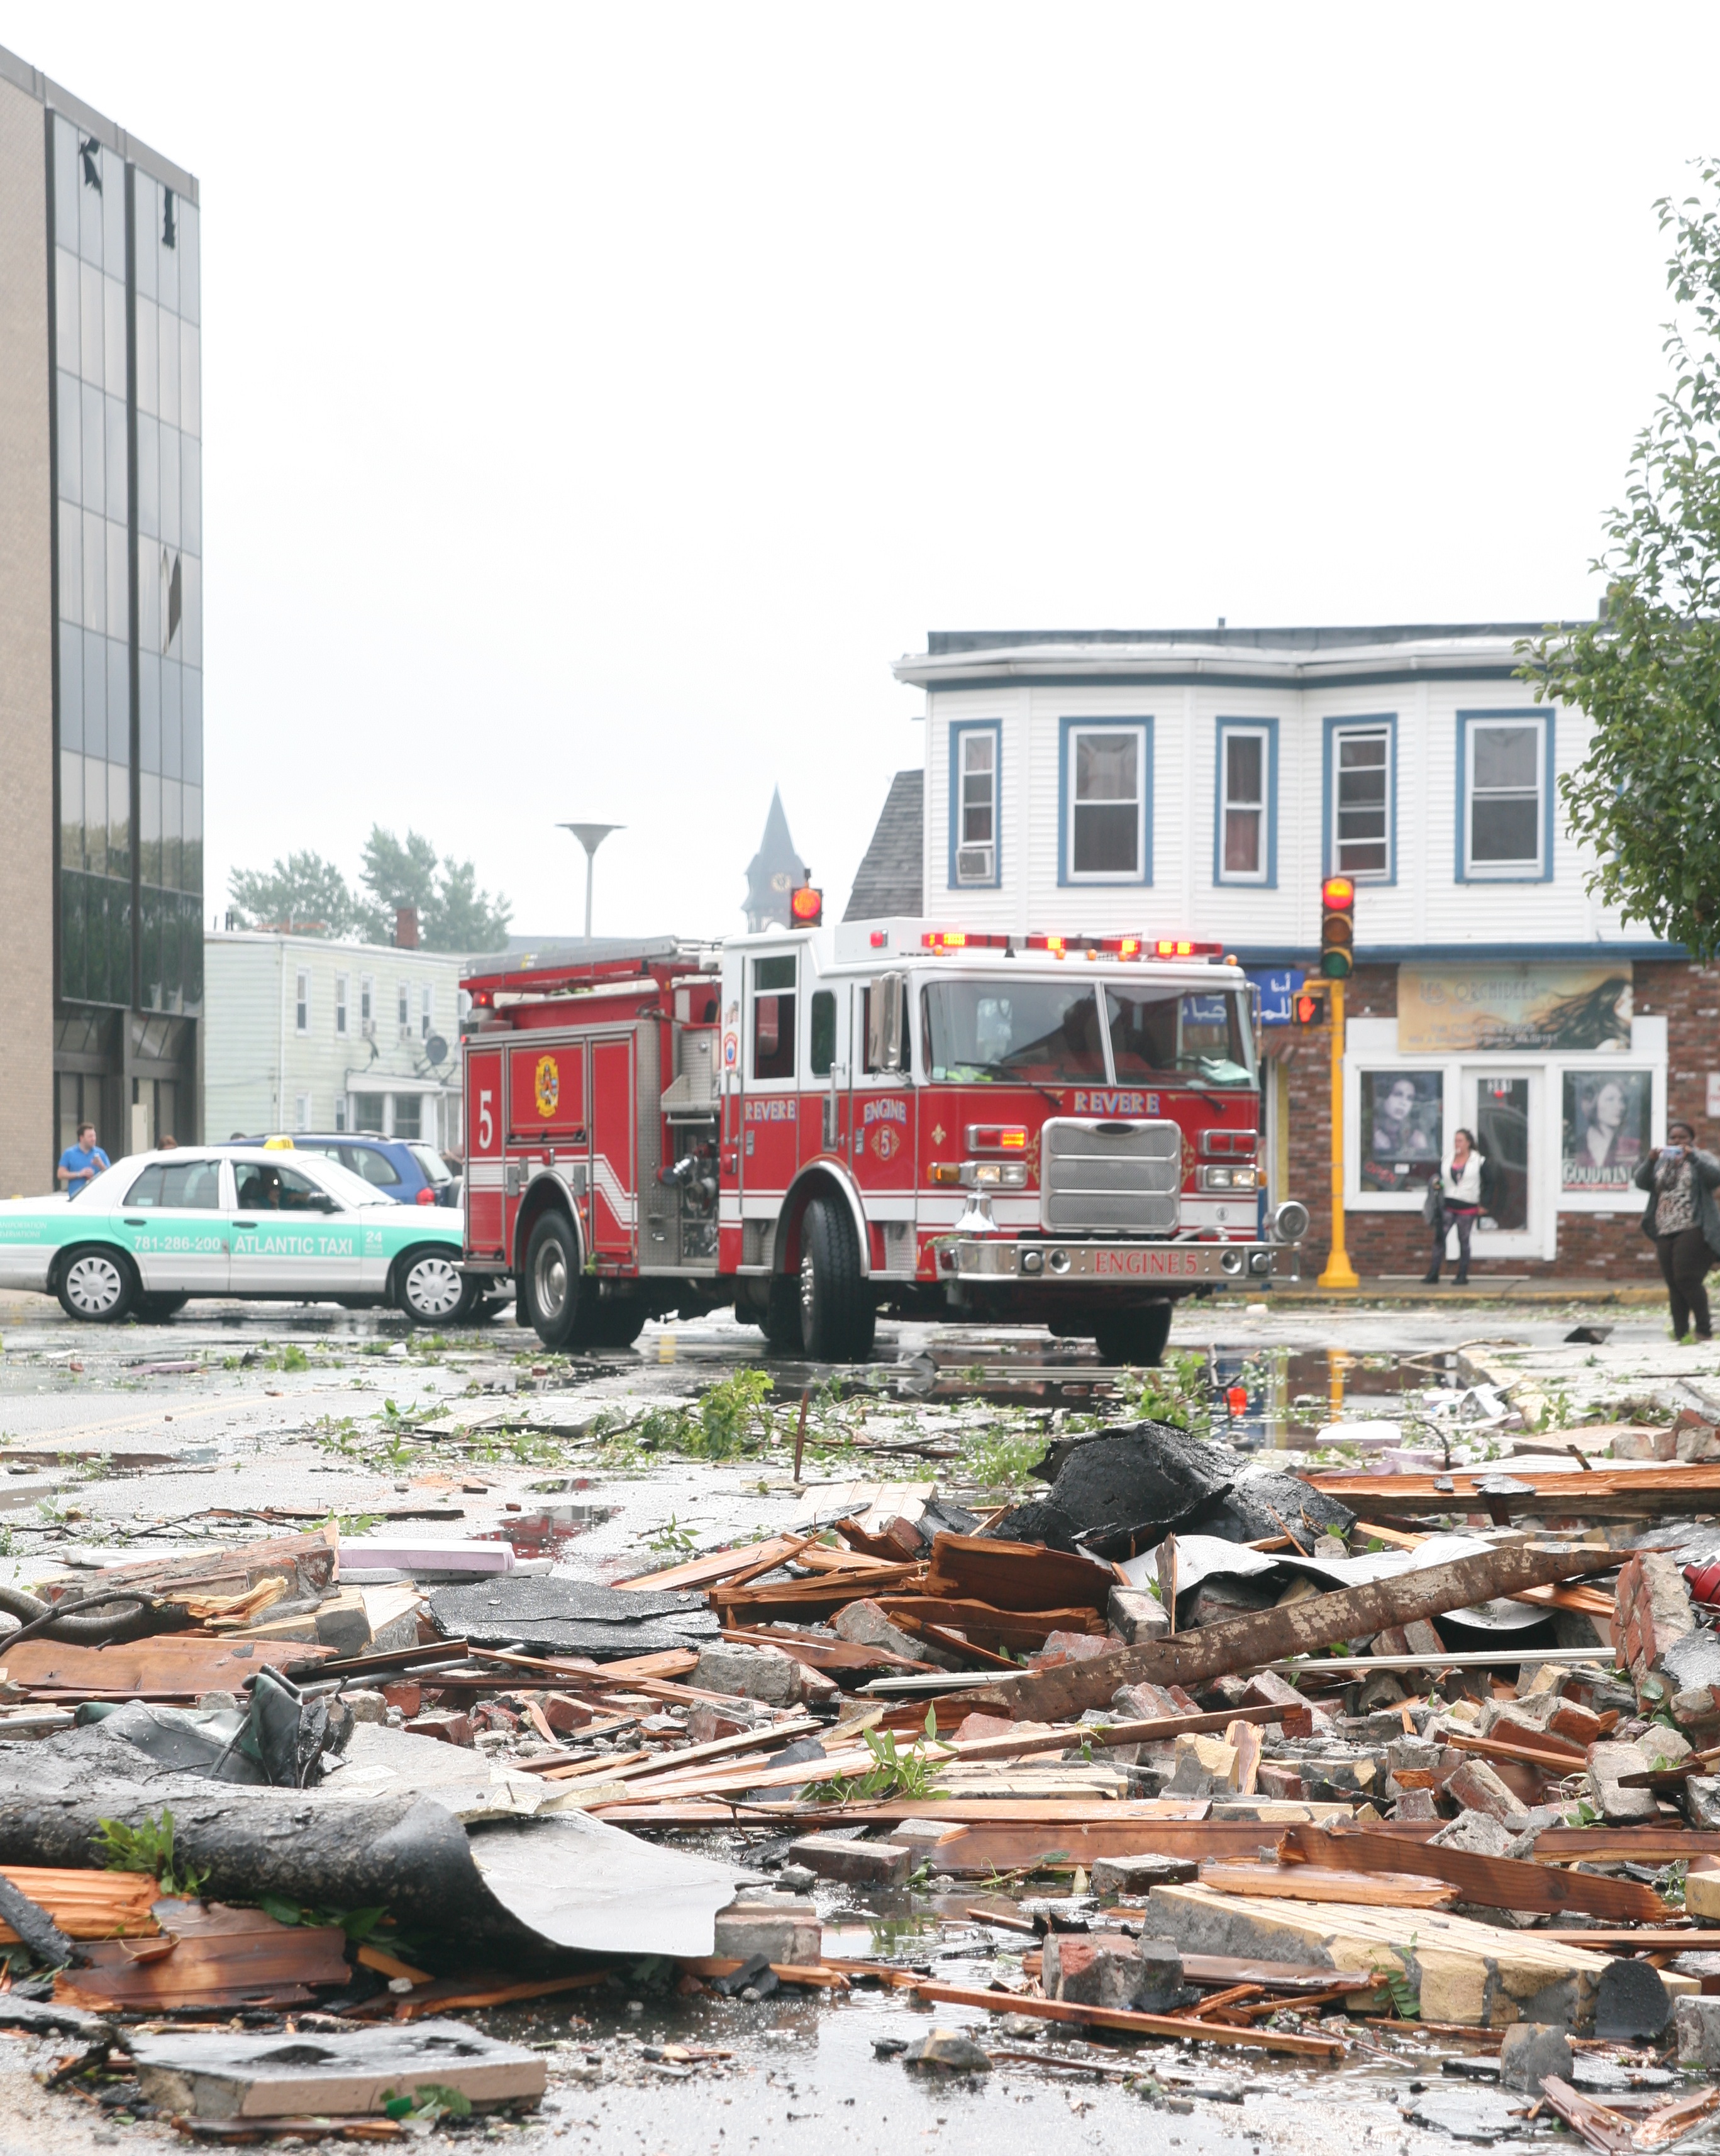 Engine 5 tries to wade through the debris-strewn streets to check on the situation.